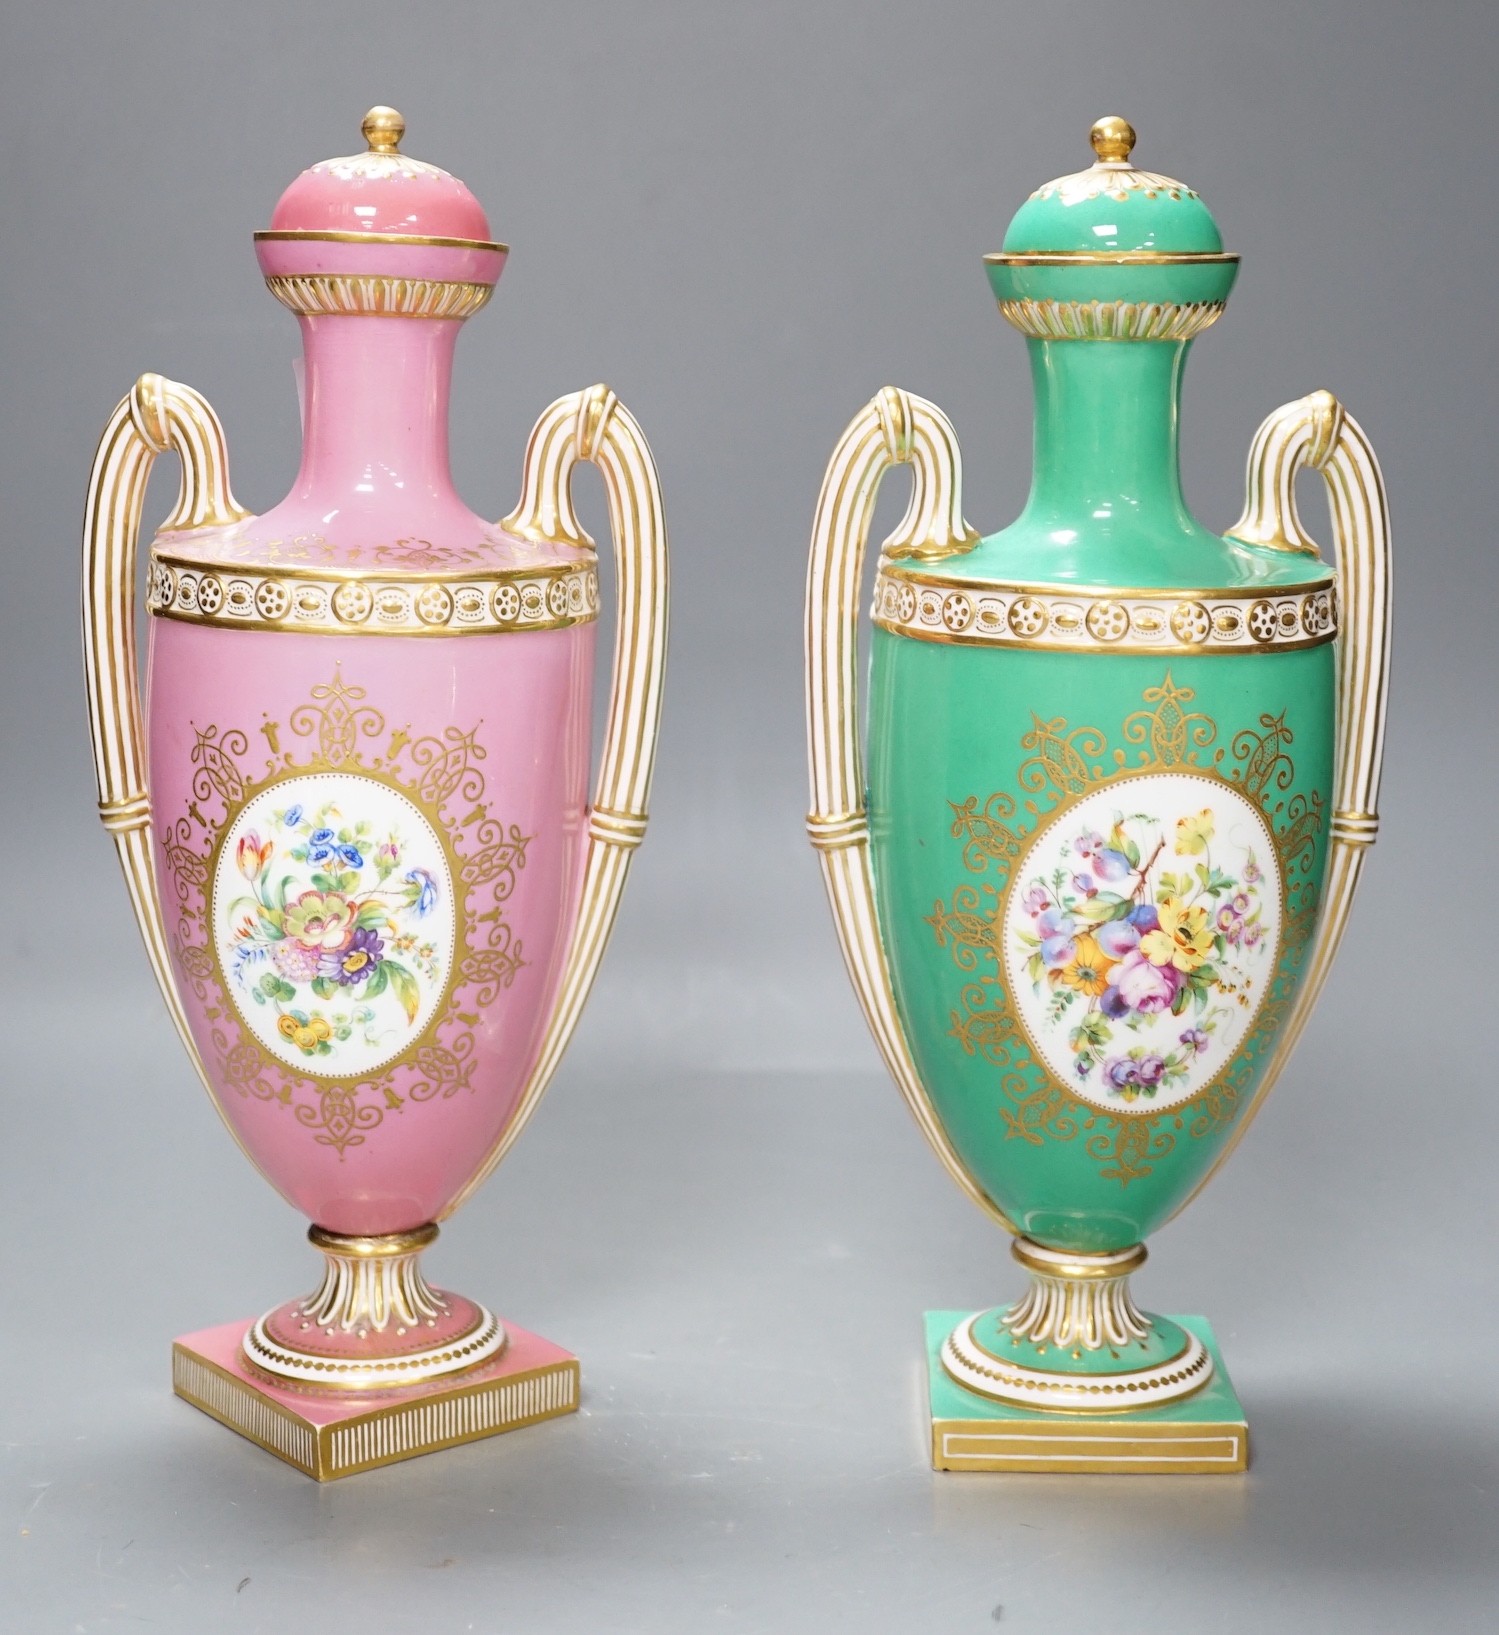 A pair of Coalport Coalbrookdale two handled vases with central oval panelled floral painting and gilt decoration, one green and the other pink, 29cm high                                                                  